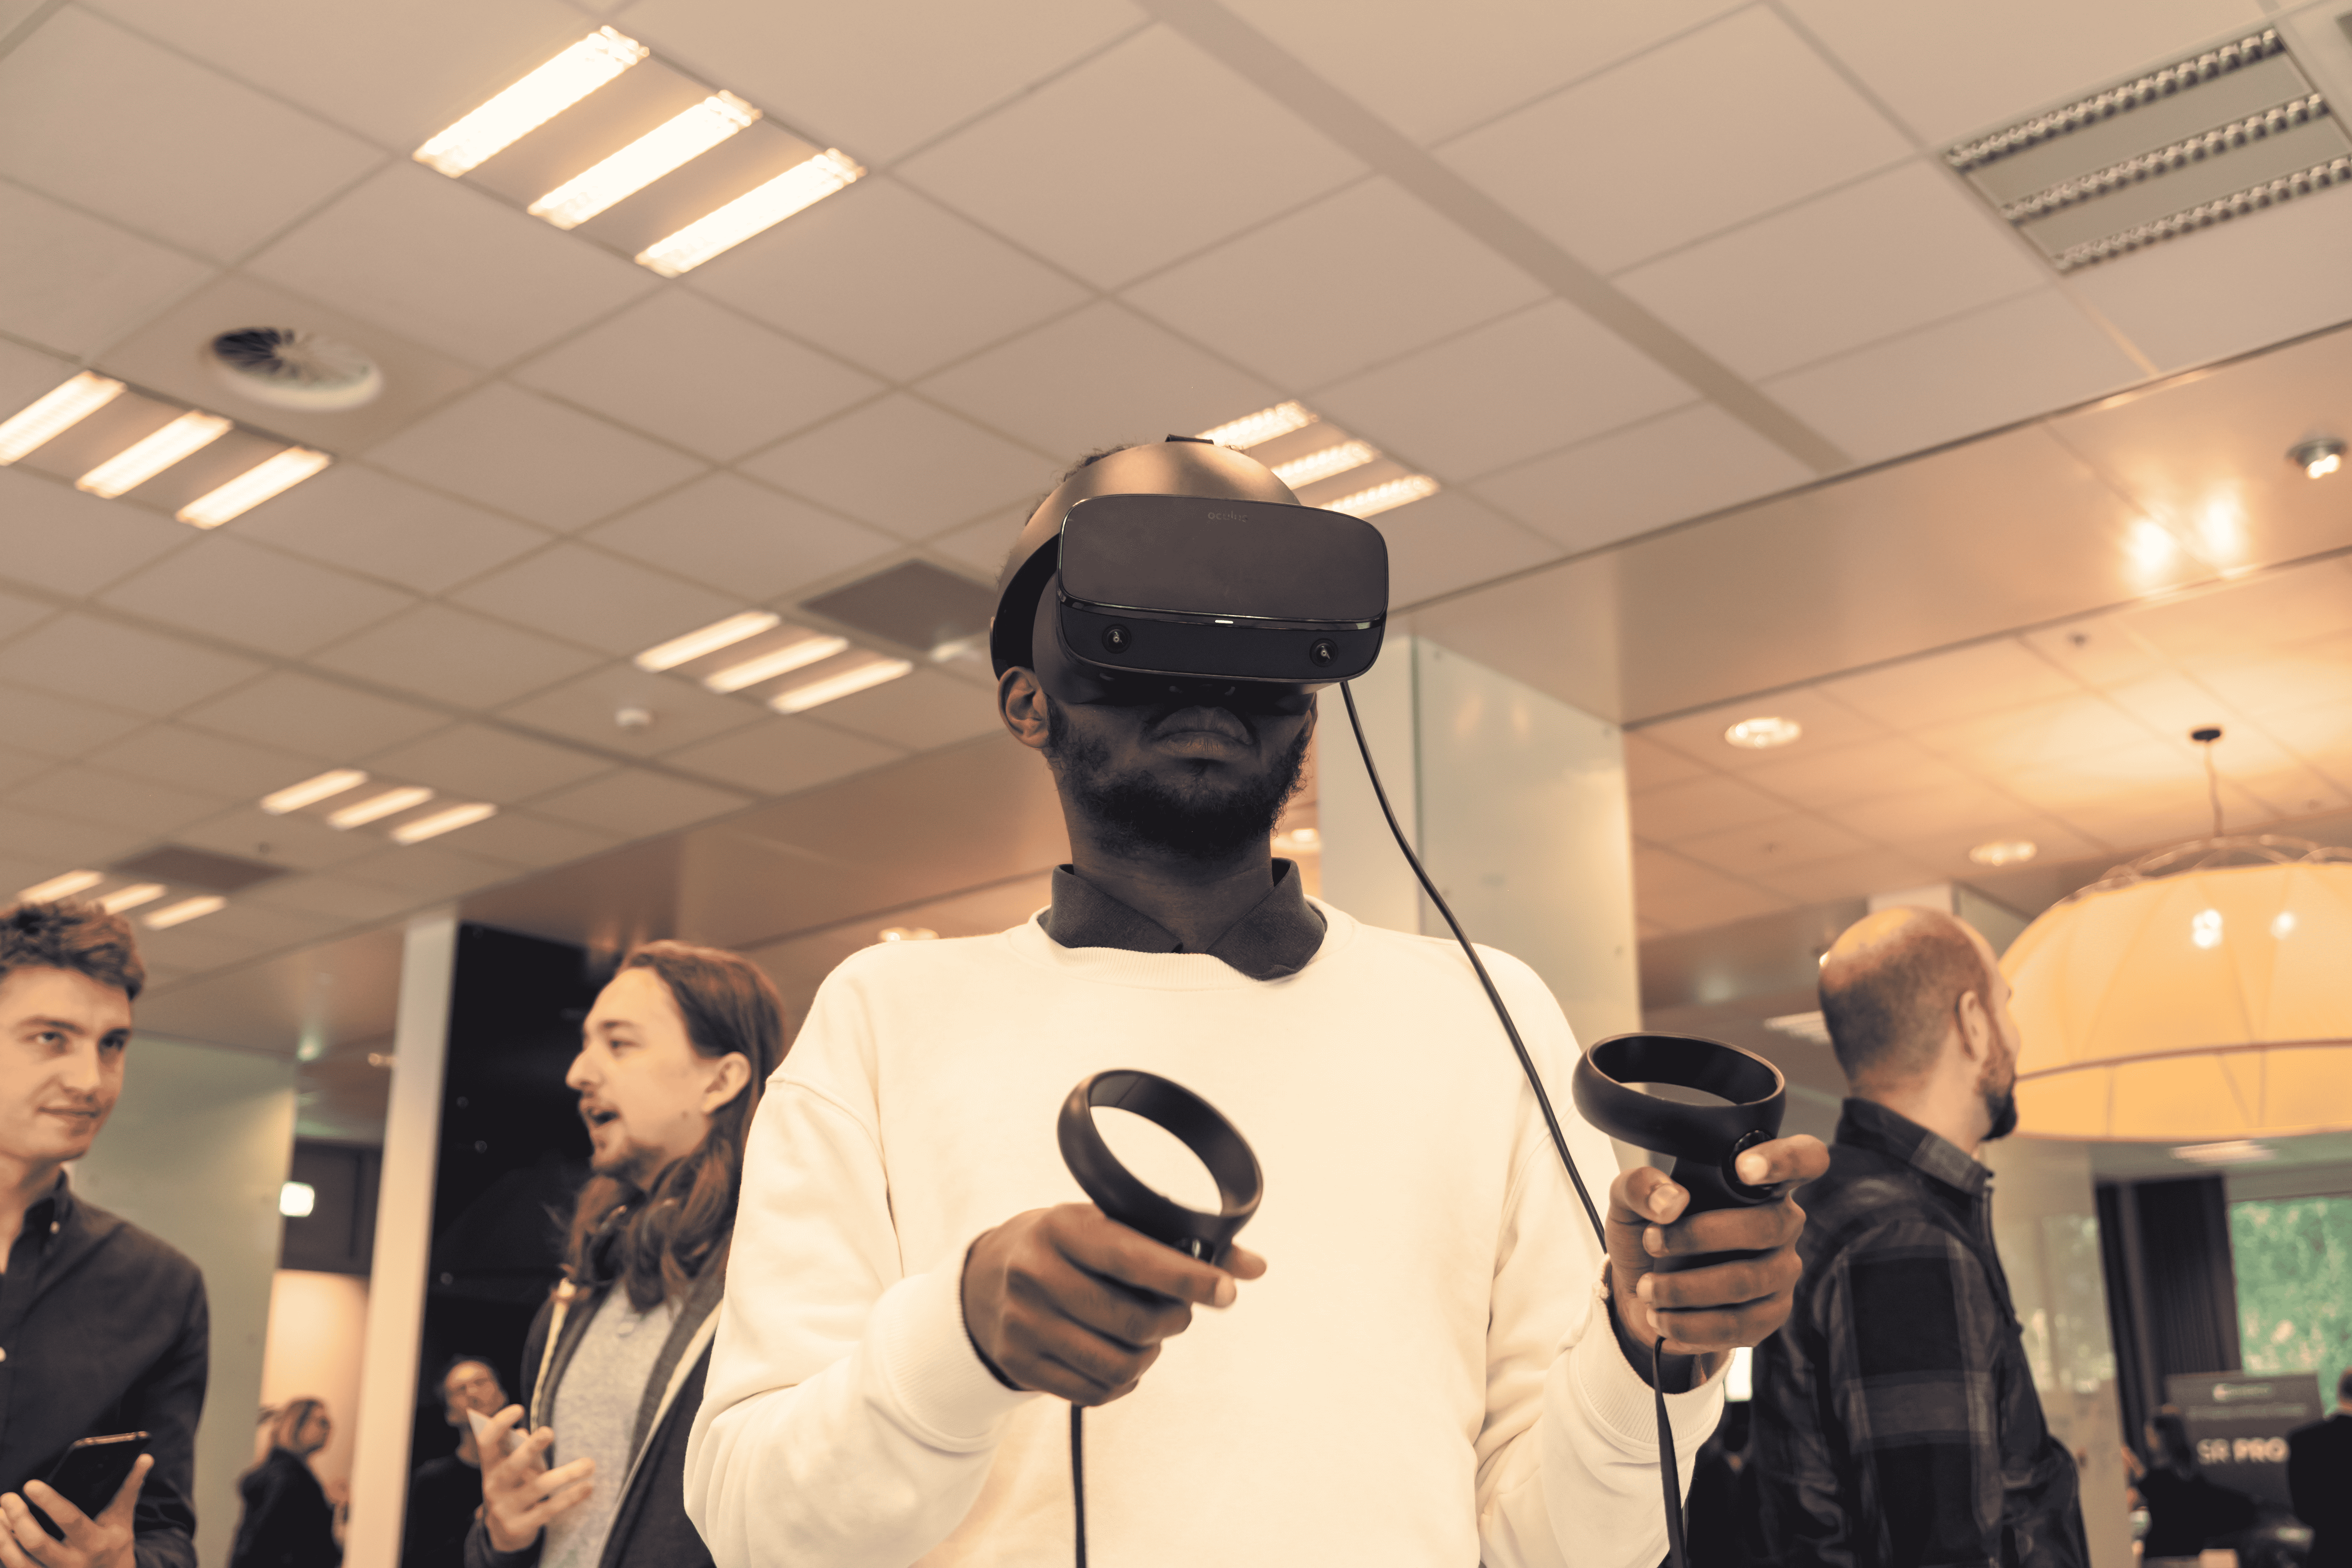 High Tech Campus Eindhoven opens itself to the Metaverse with 3EALITY